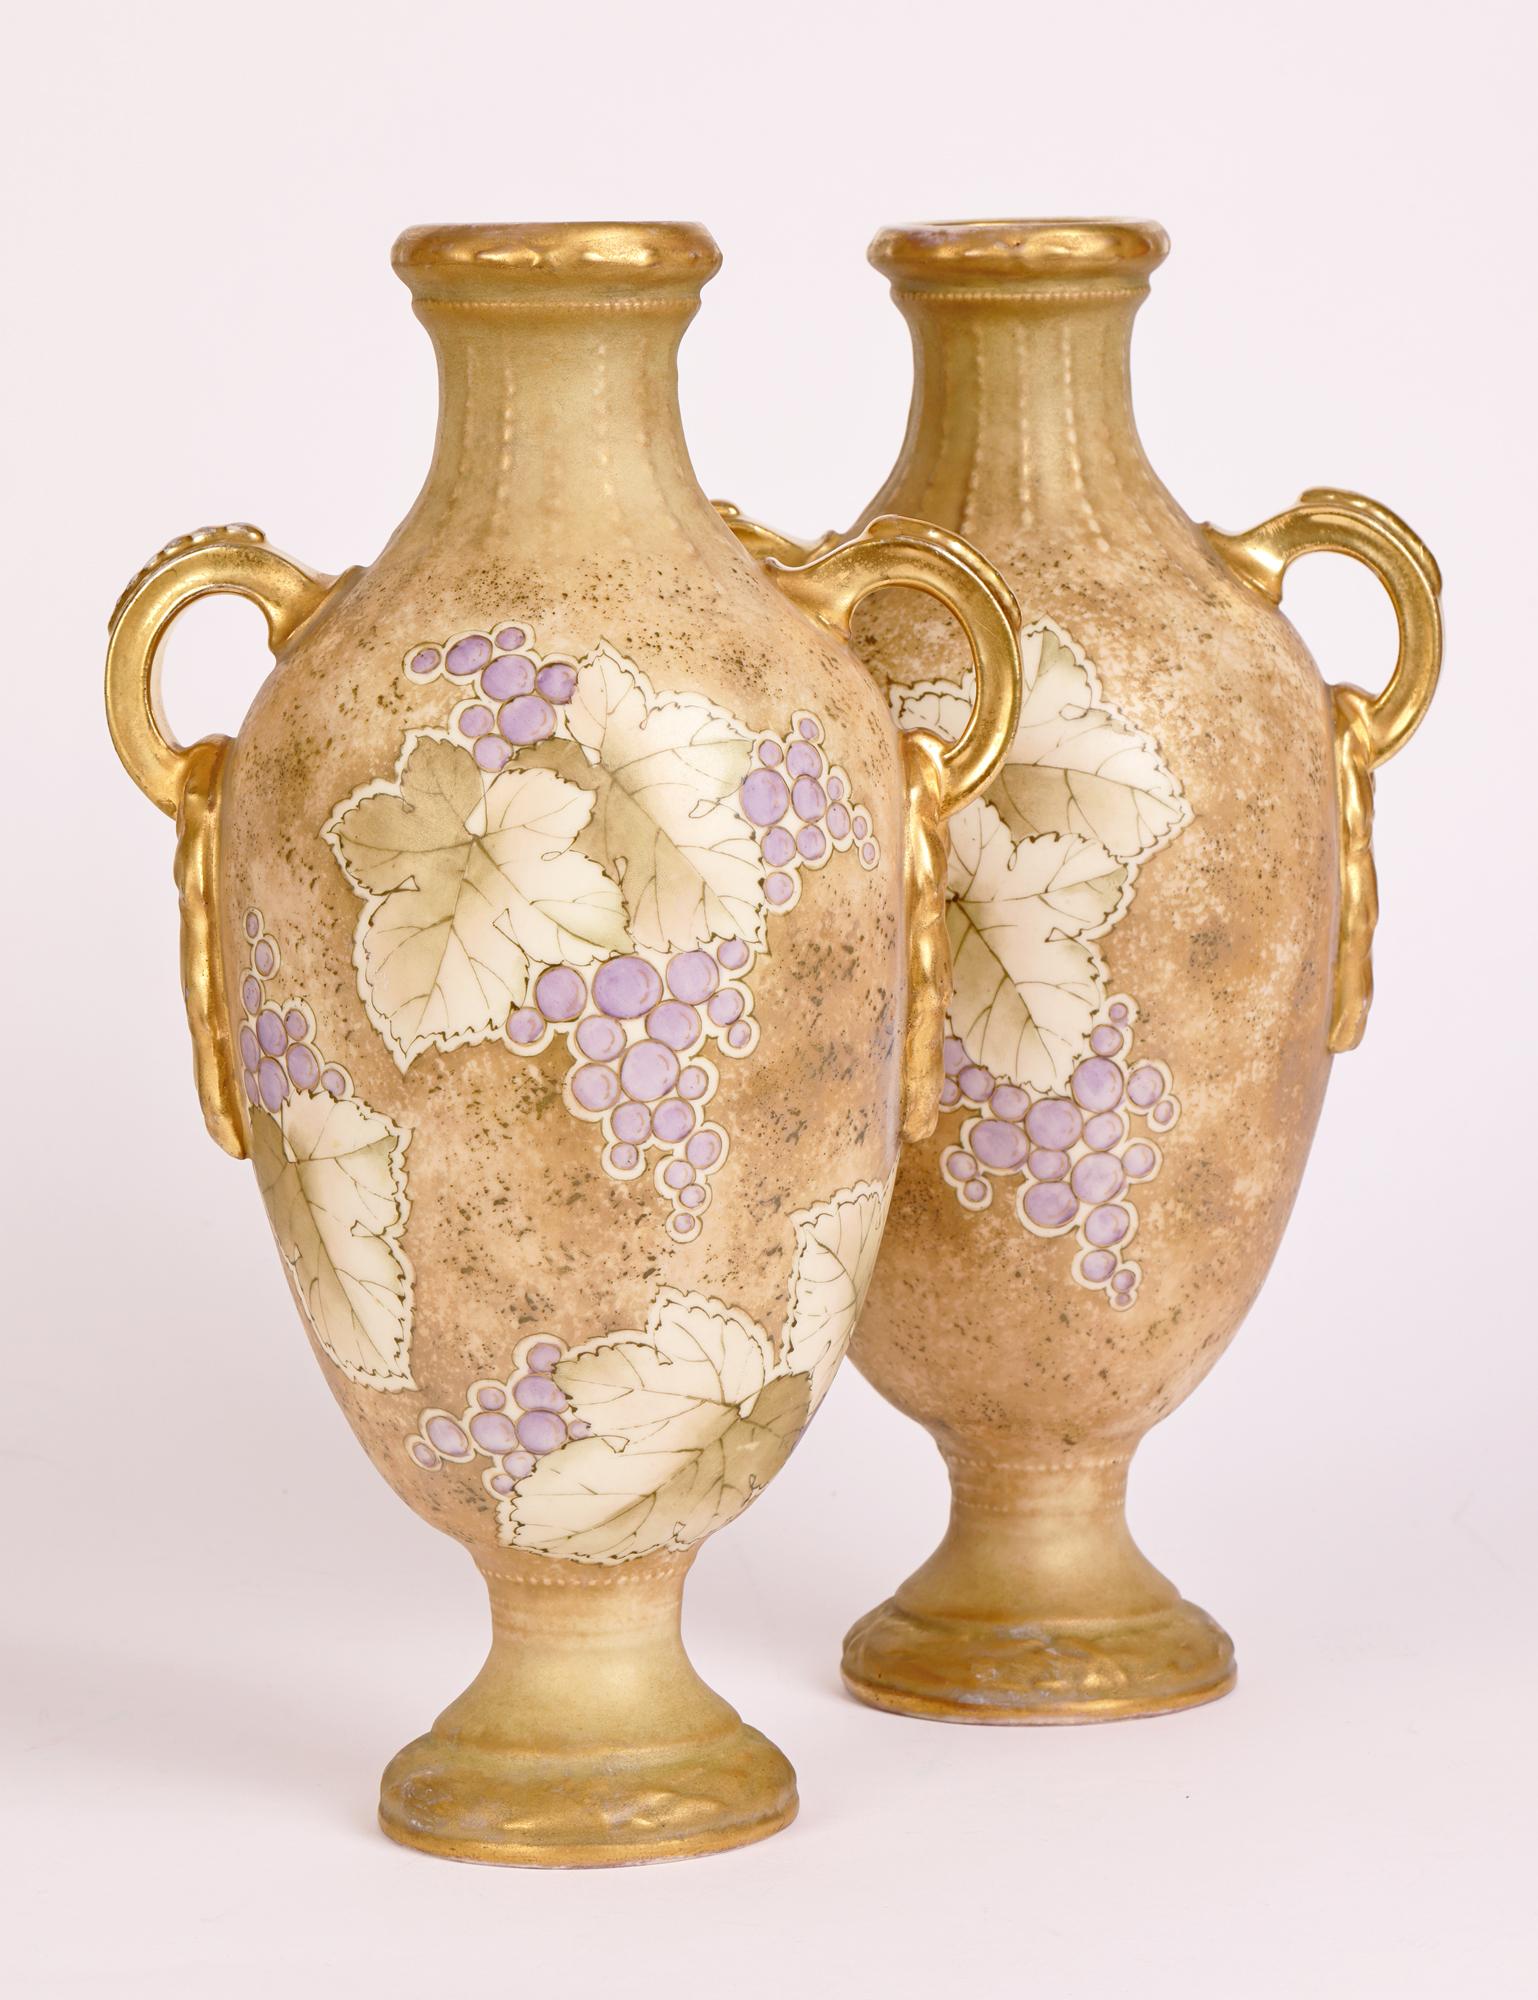 Turn Teplitz RSK Amphora Pair Art Nouveau Hand-Painted Twin Handled Vases For Sale 6